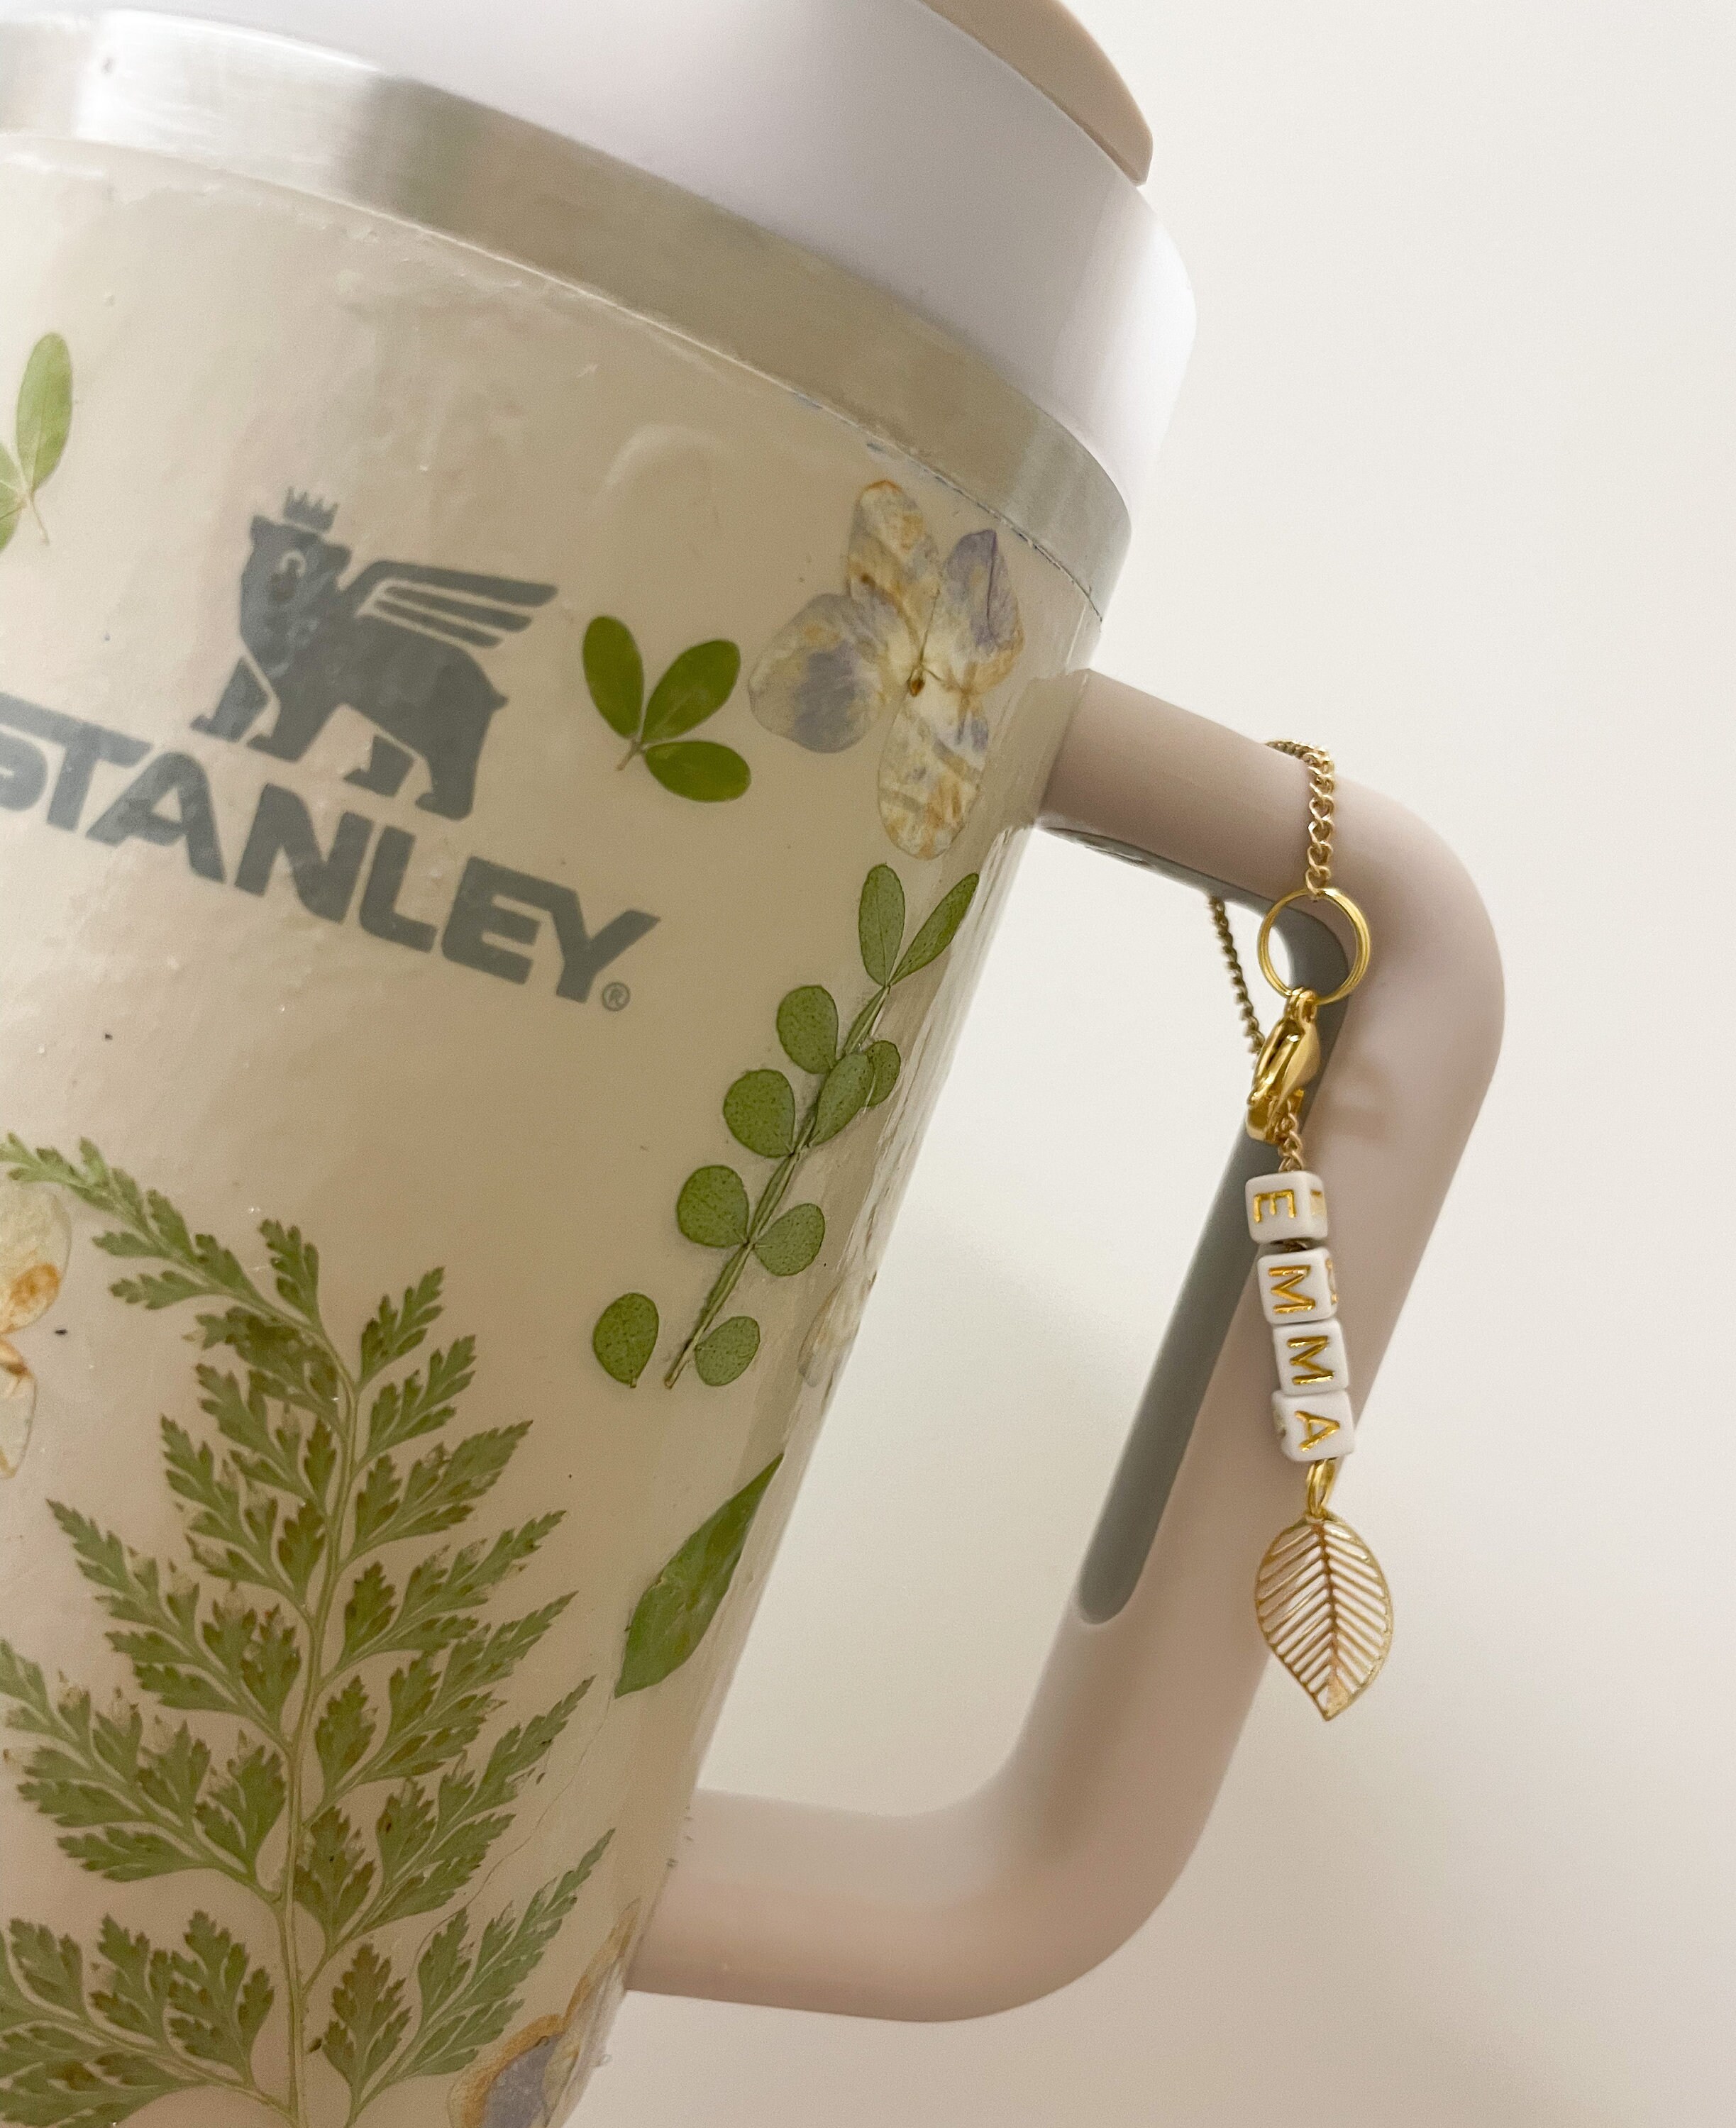 Stanley Tumbler Cup Charm Accessories for Water Bottle Stanley Cup Tumbler  Handle Charm Stanley Accessories Gift for Dentist Tooth Charm -  Finland